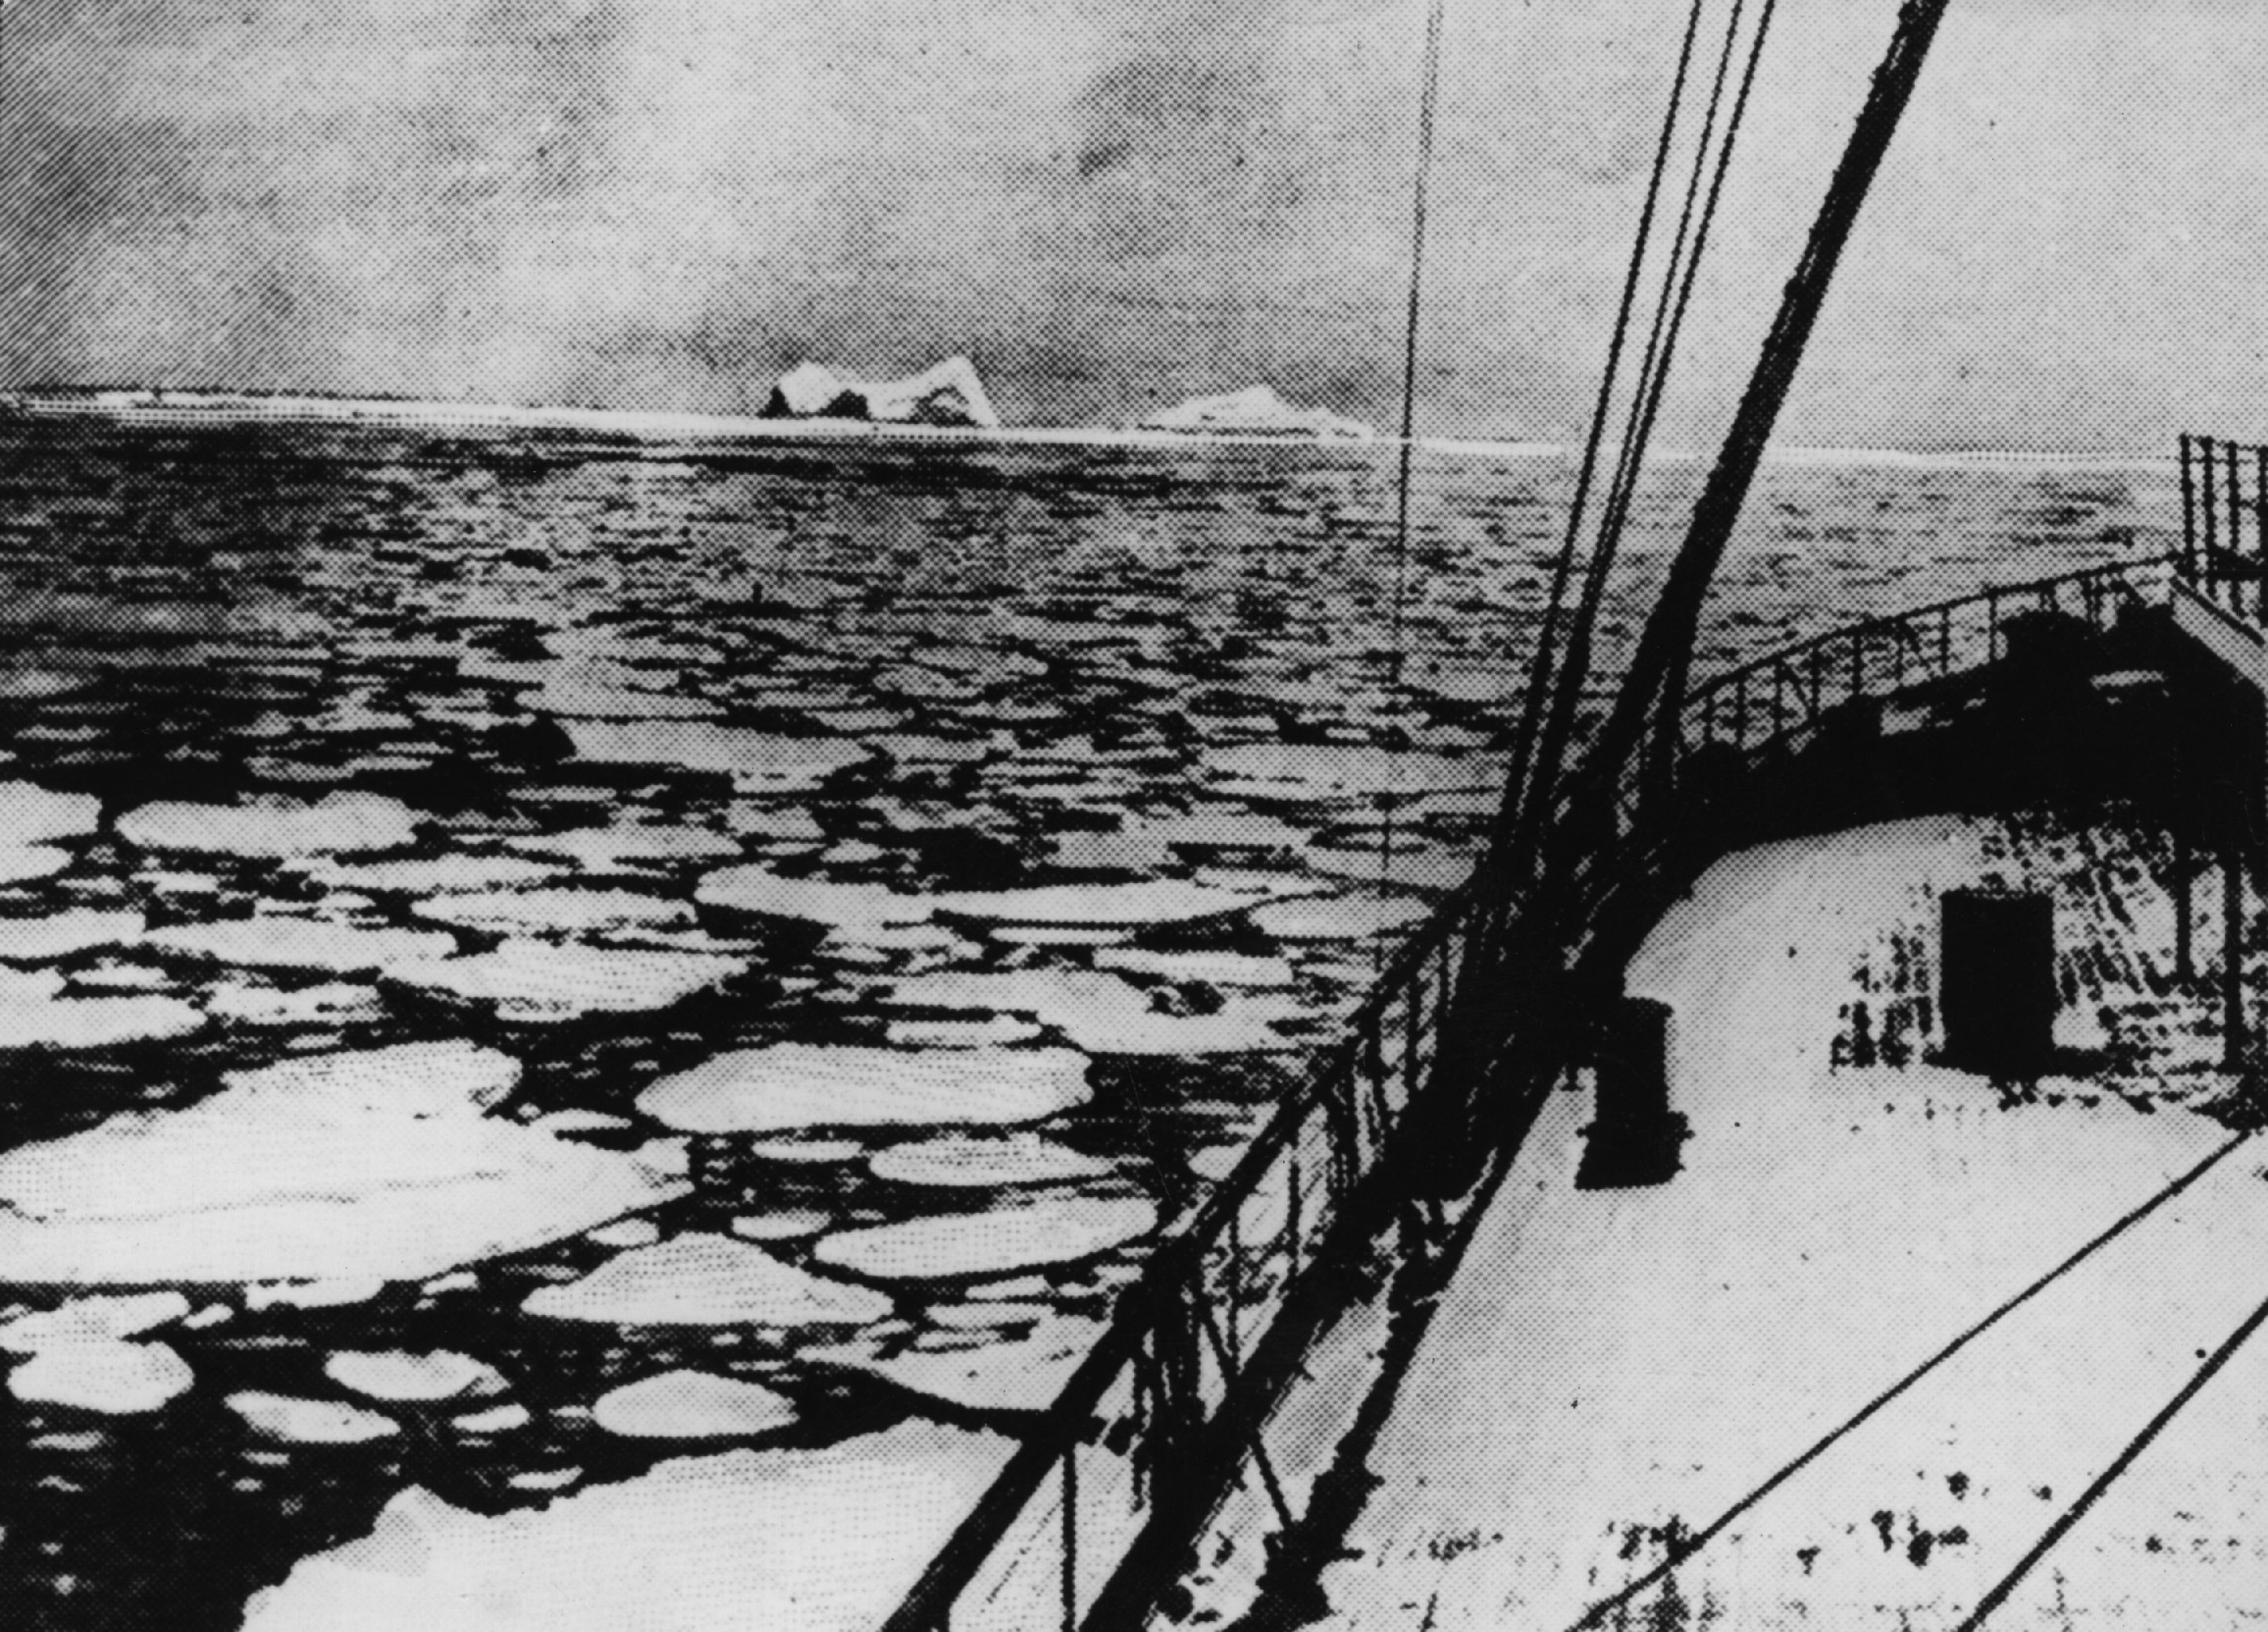 These old Titanic photos show just how much has changed since April 1912